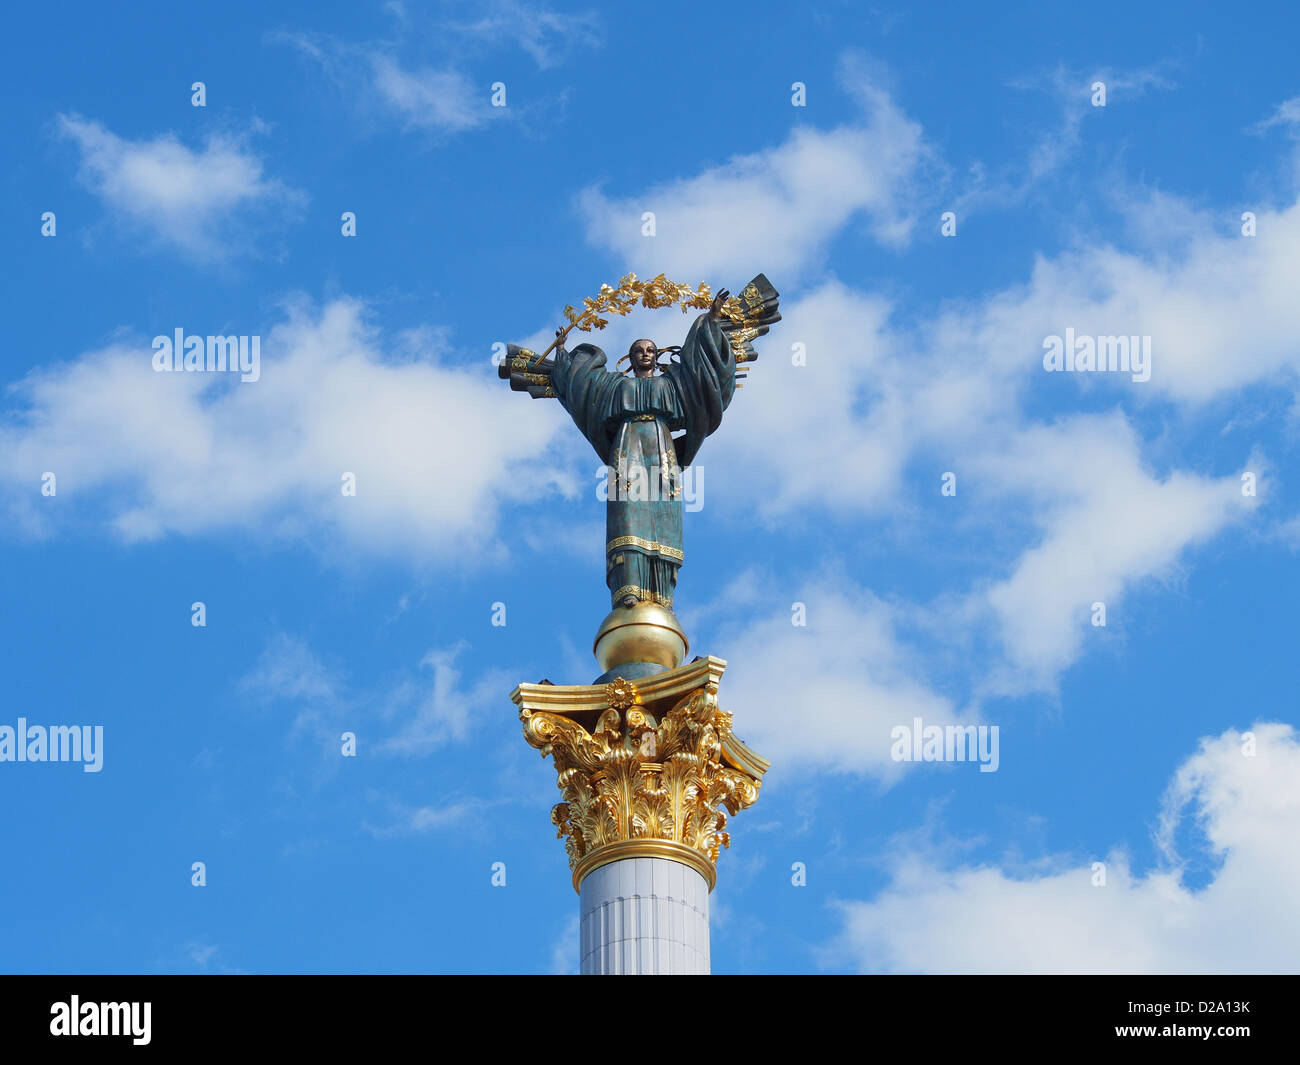 The Independence Monument at the Independence Square in Kiev, Ukraine Stock Photo